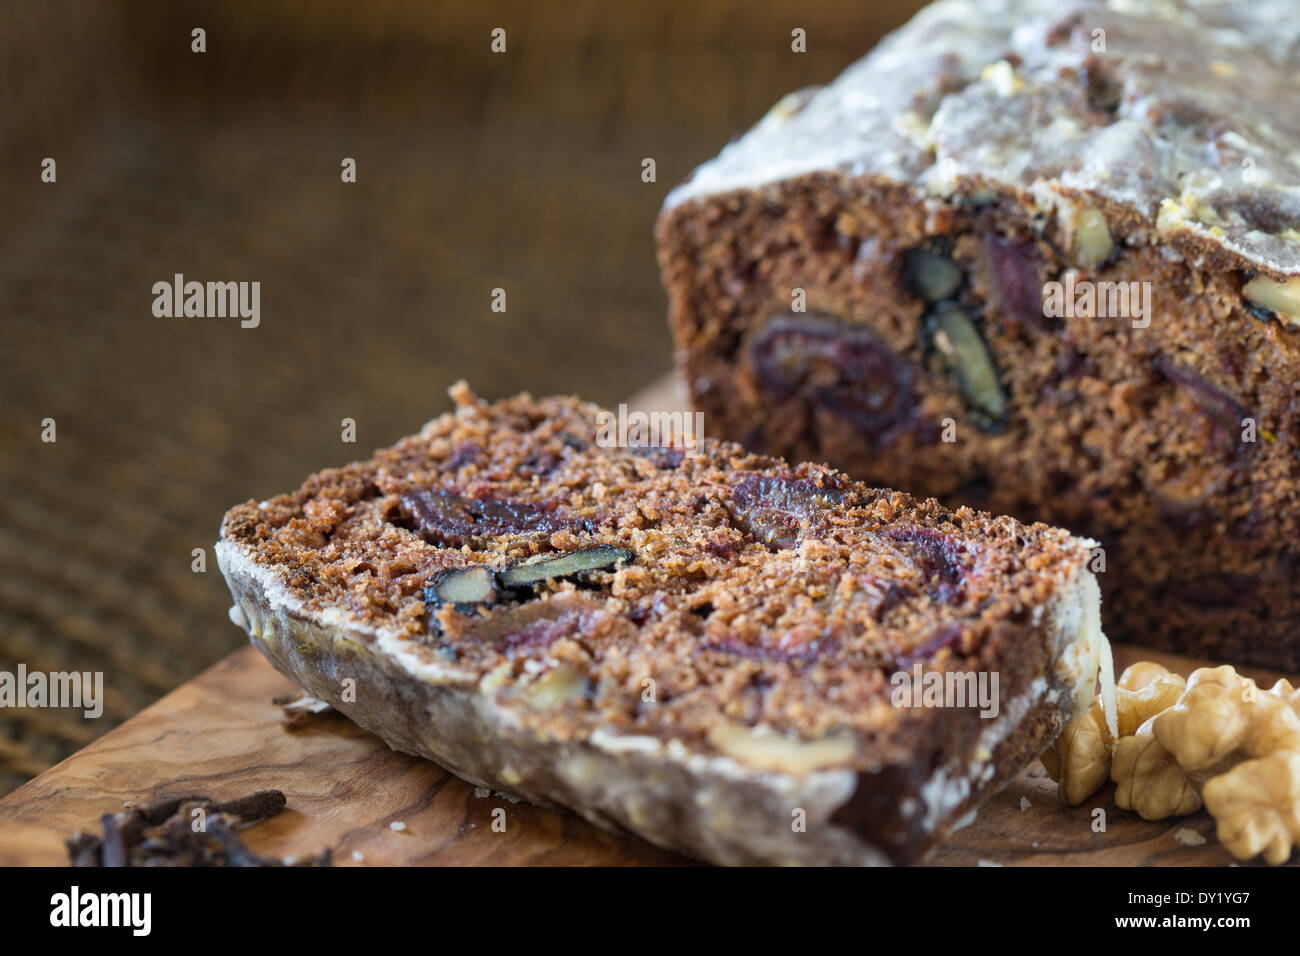 Sliced homemade date and walnut cake on wooden board and woven tray. Stock Photo